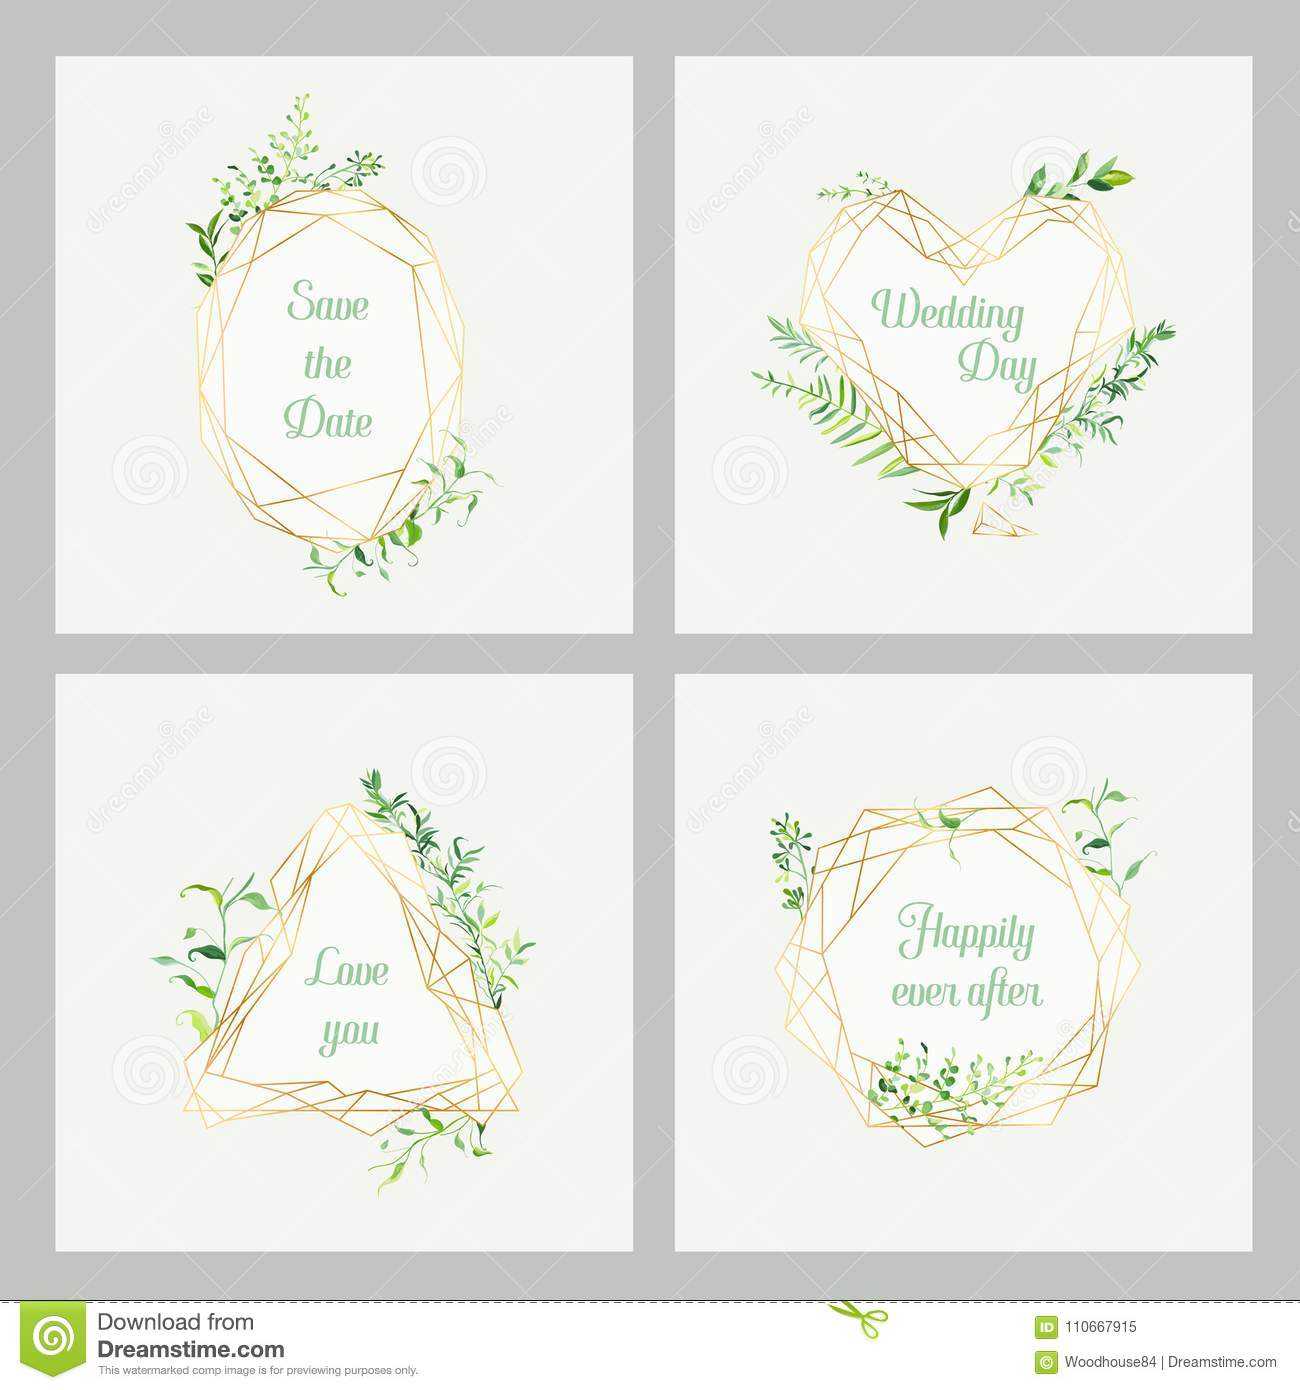 Wedding Invitation Floral Templates Set. Save The Date With Celebrate It Templates Place Cards